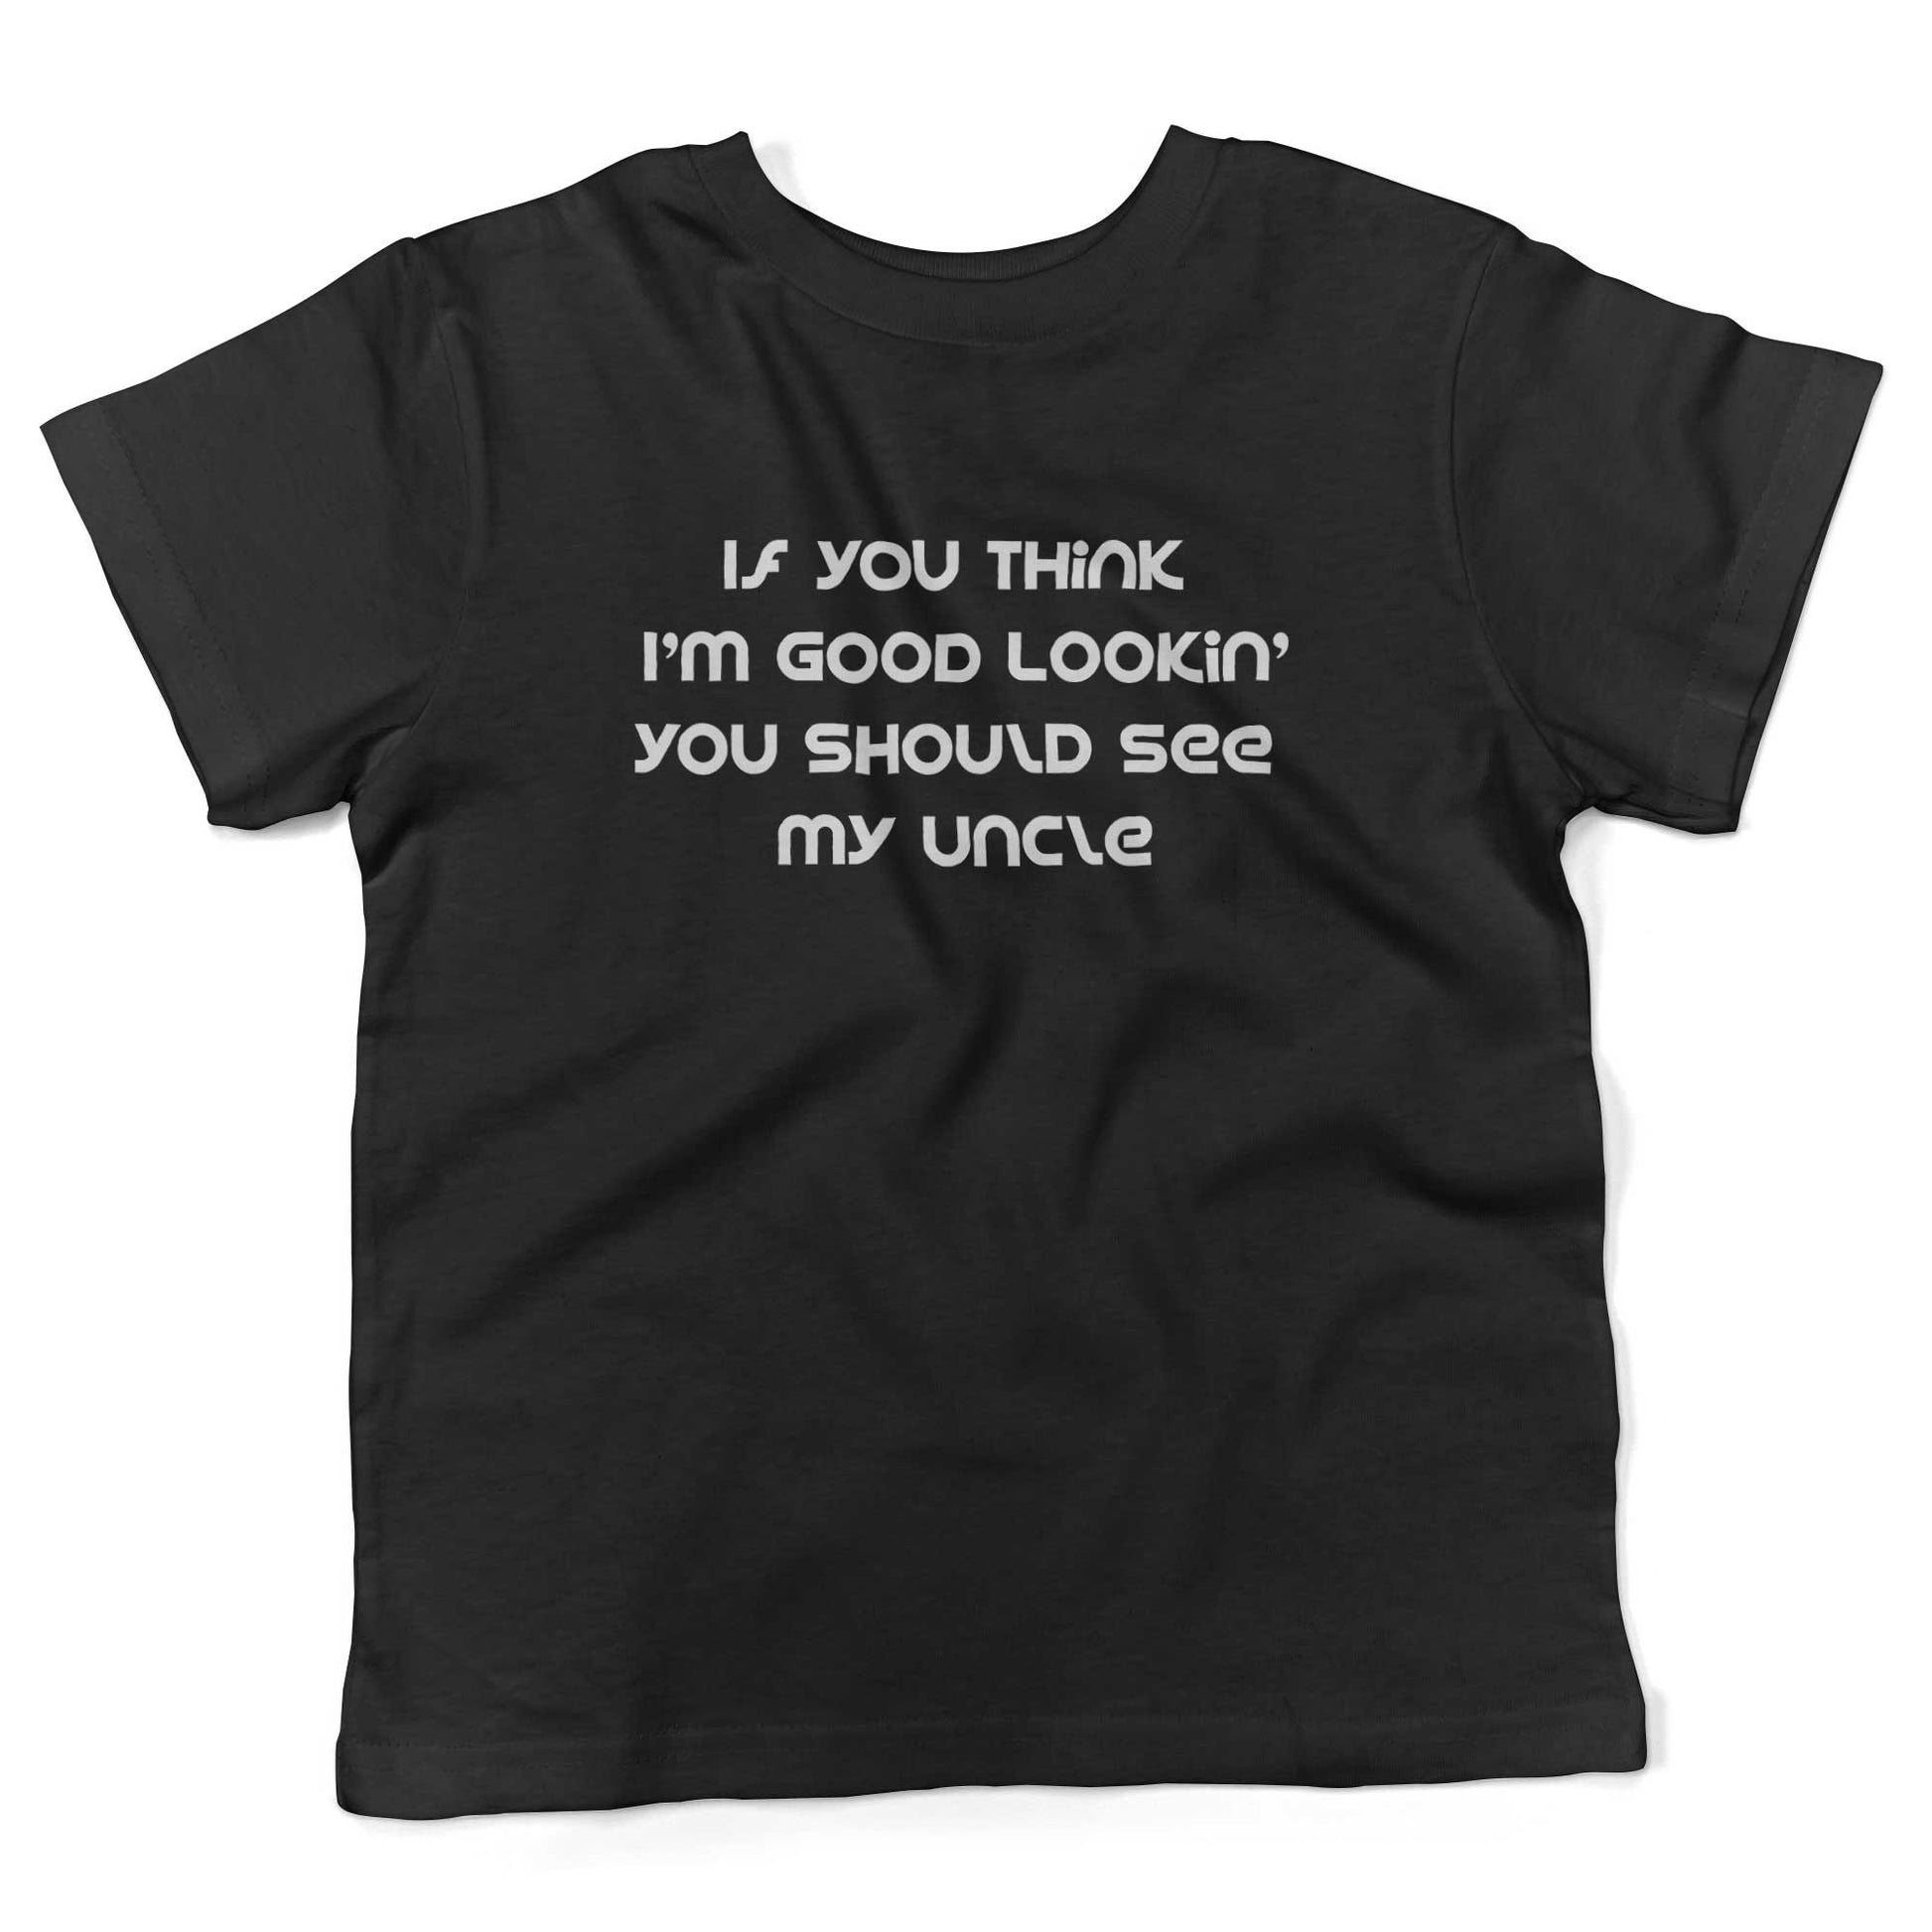 If You Think I'm Good Lookin' You Should See My Uncle Toddler Shirt-Organic Black-2T